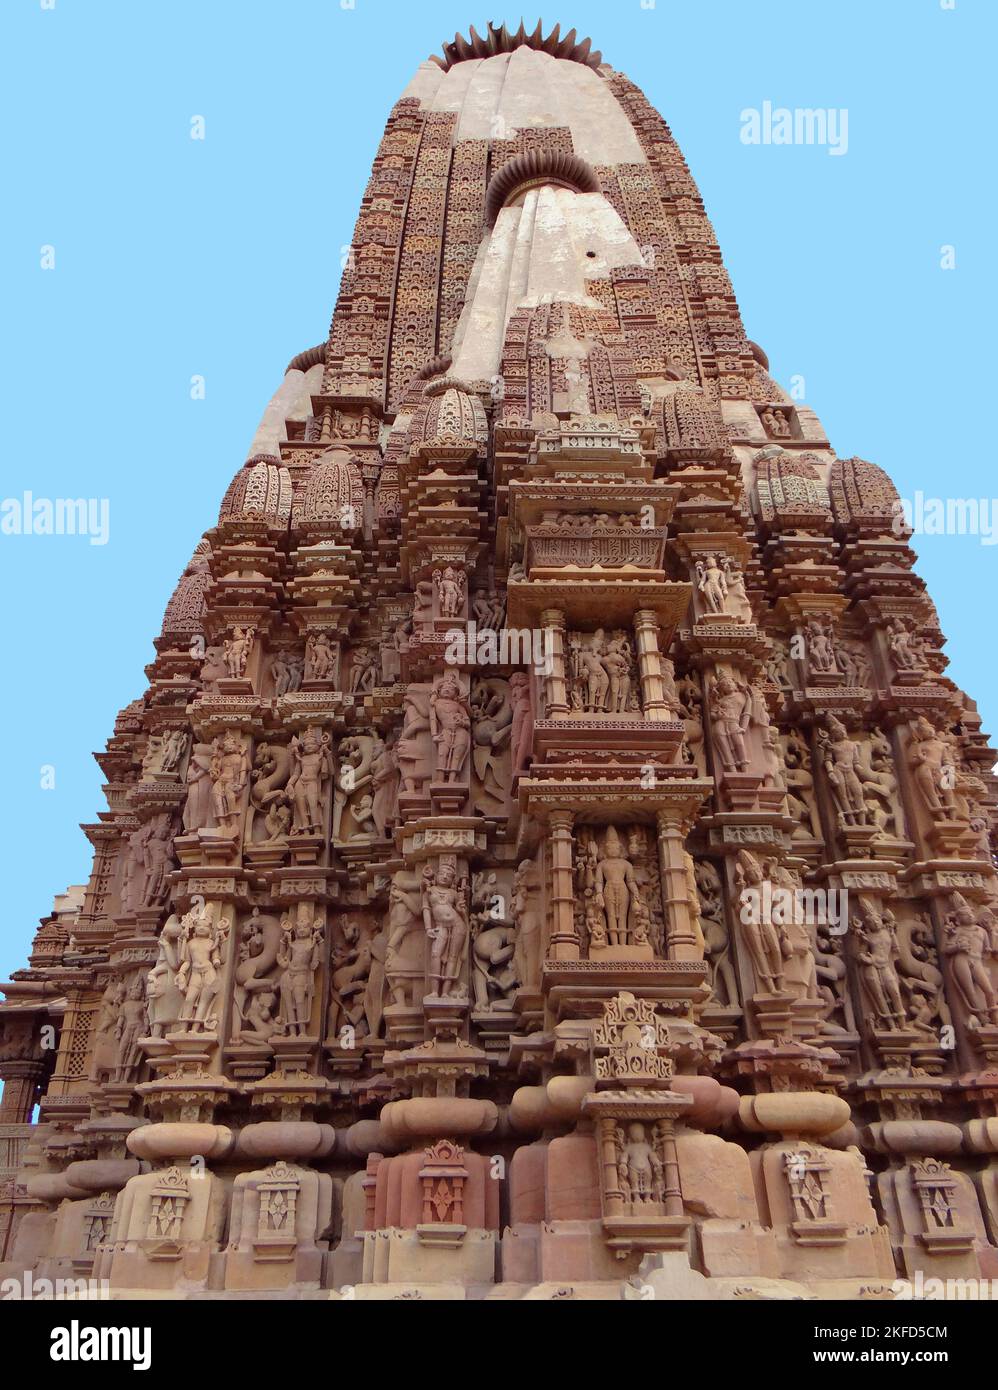 A UNESCO world heritage site in central India, Khajuraho with sculptured temples Stock Photo